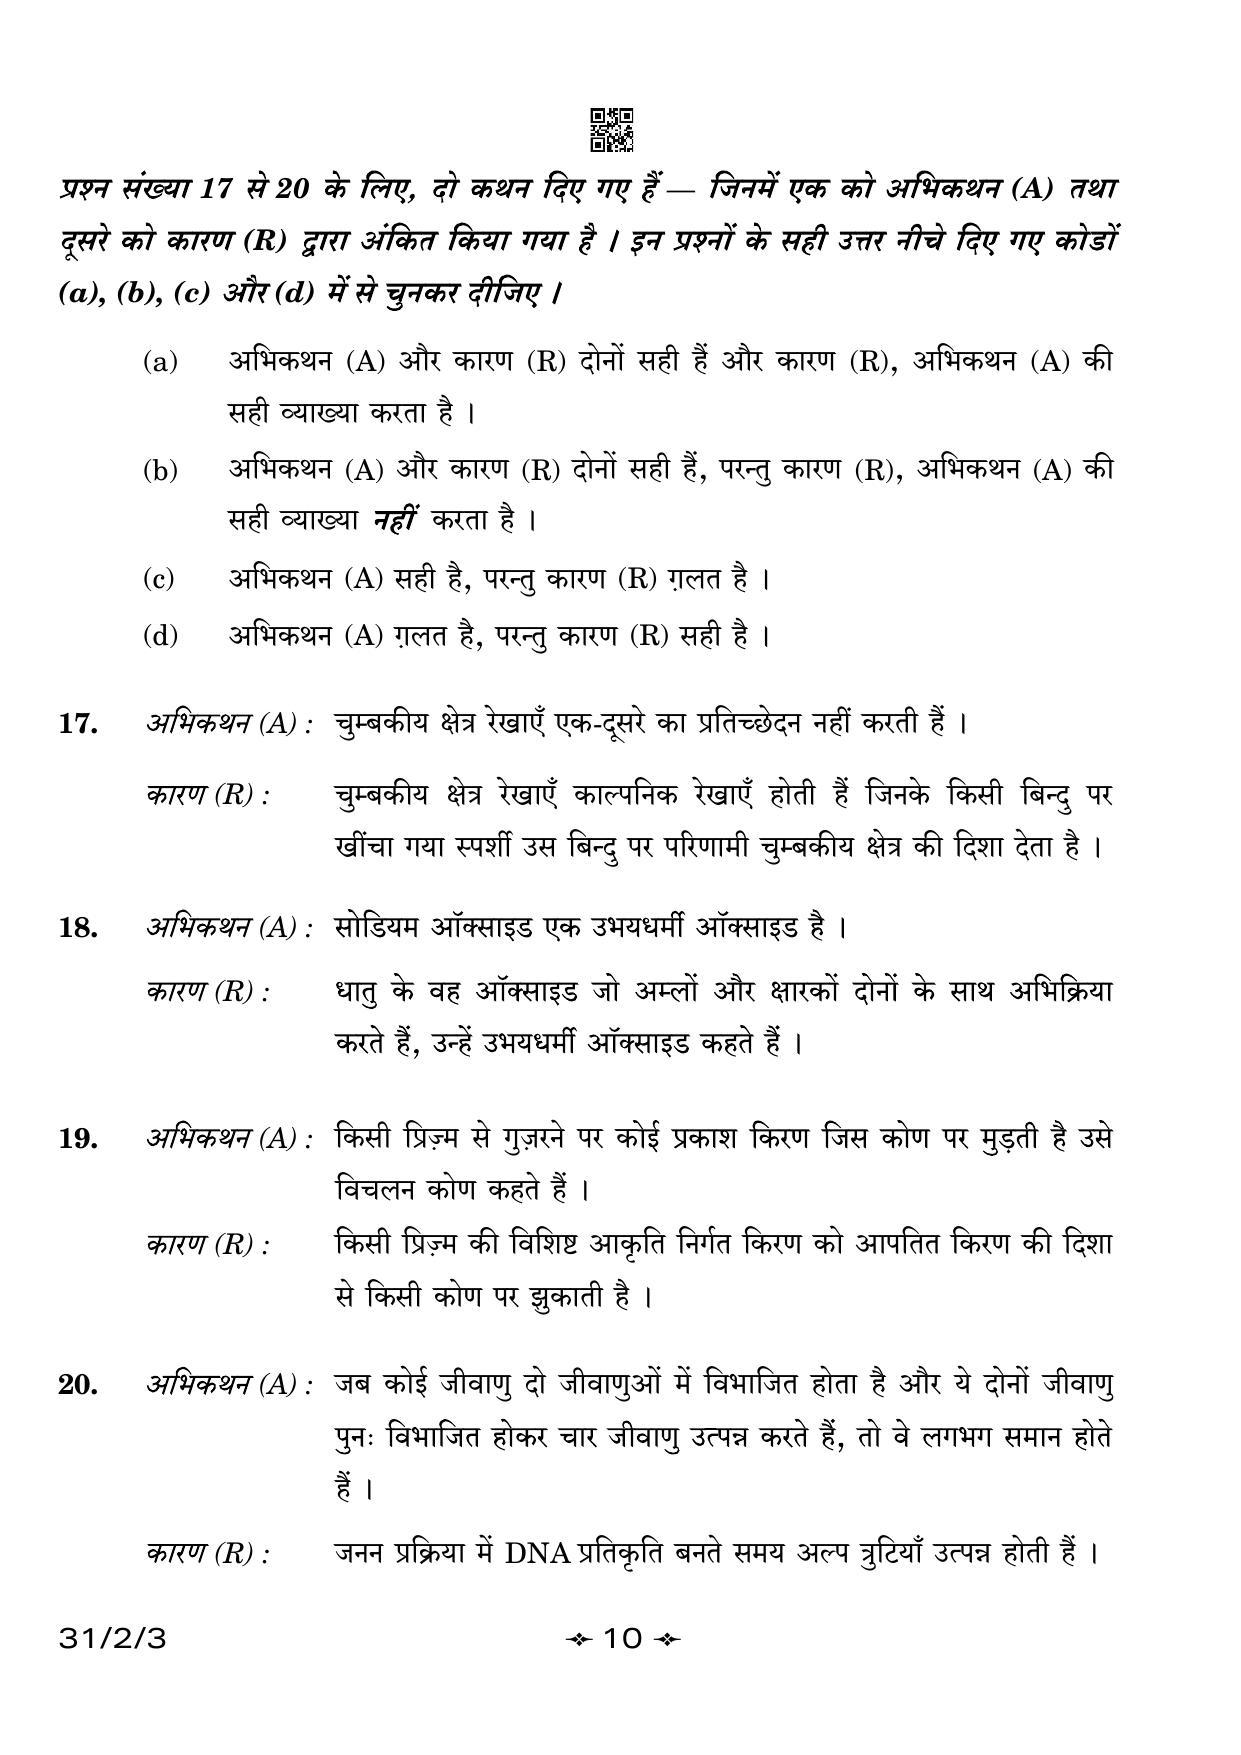 CBSE Class 10 31-2-3 Science 2023 Question Paper - Page 10